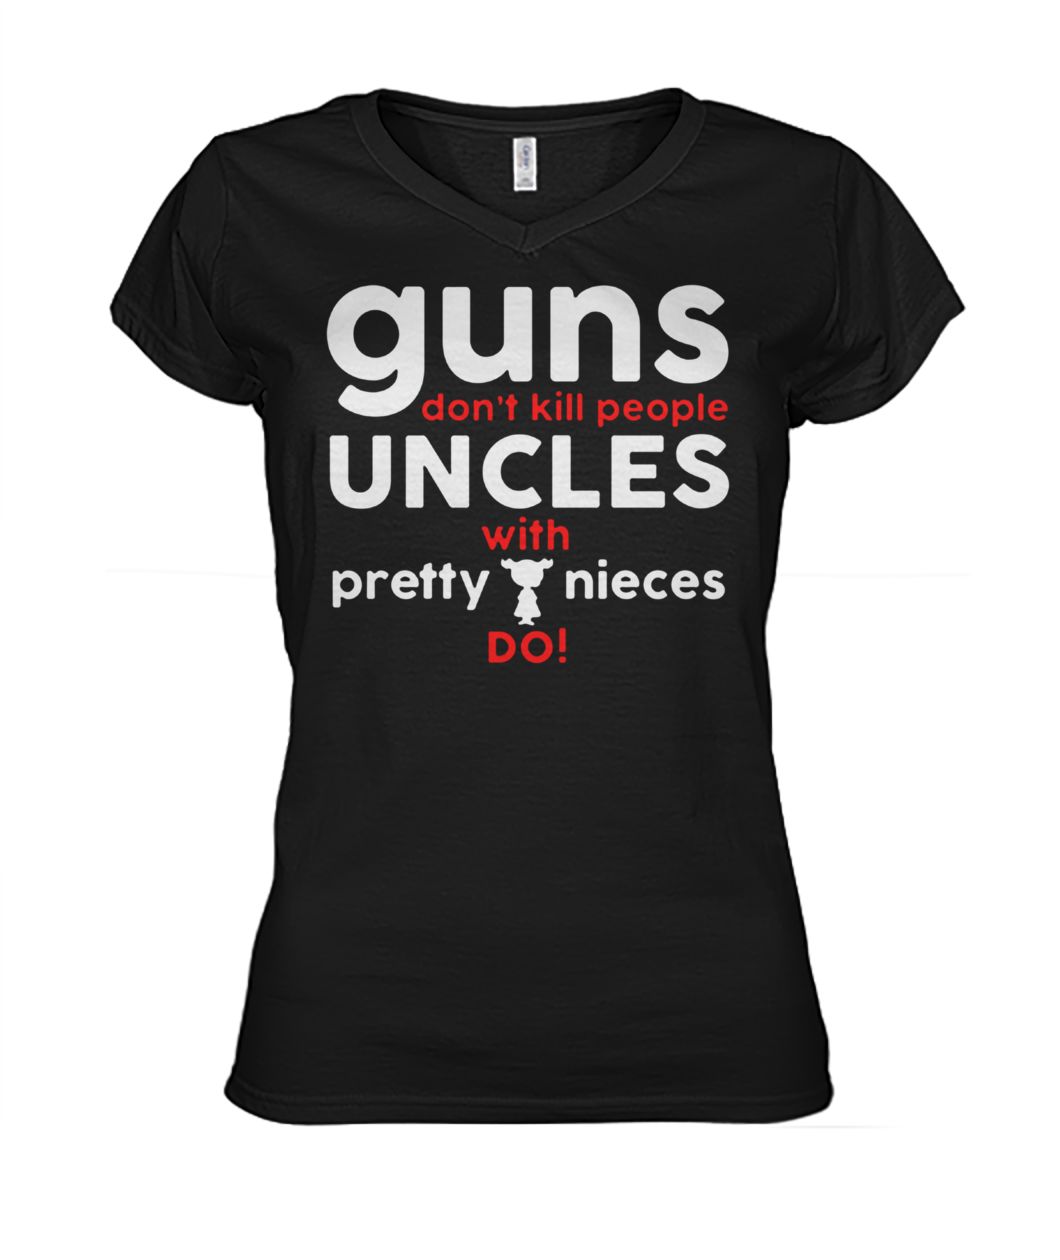 Guns don't kill people uncles with pretty nieces do women's v-neck